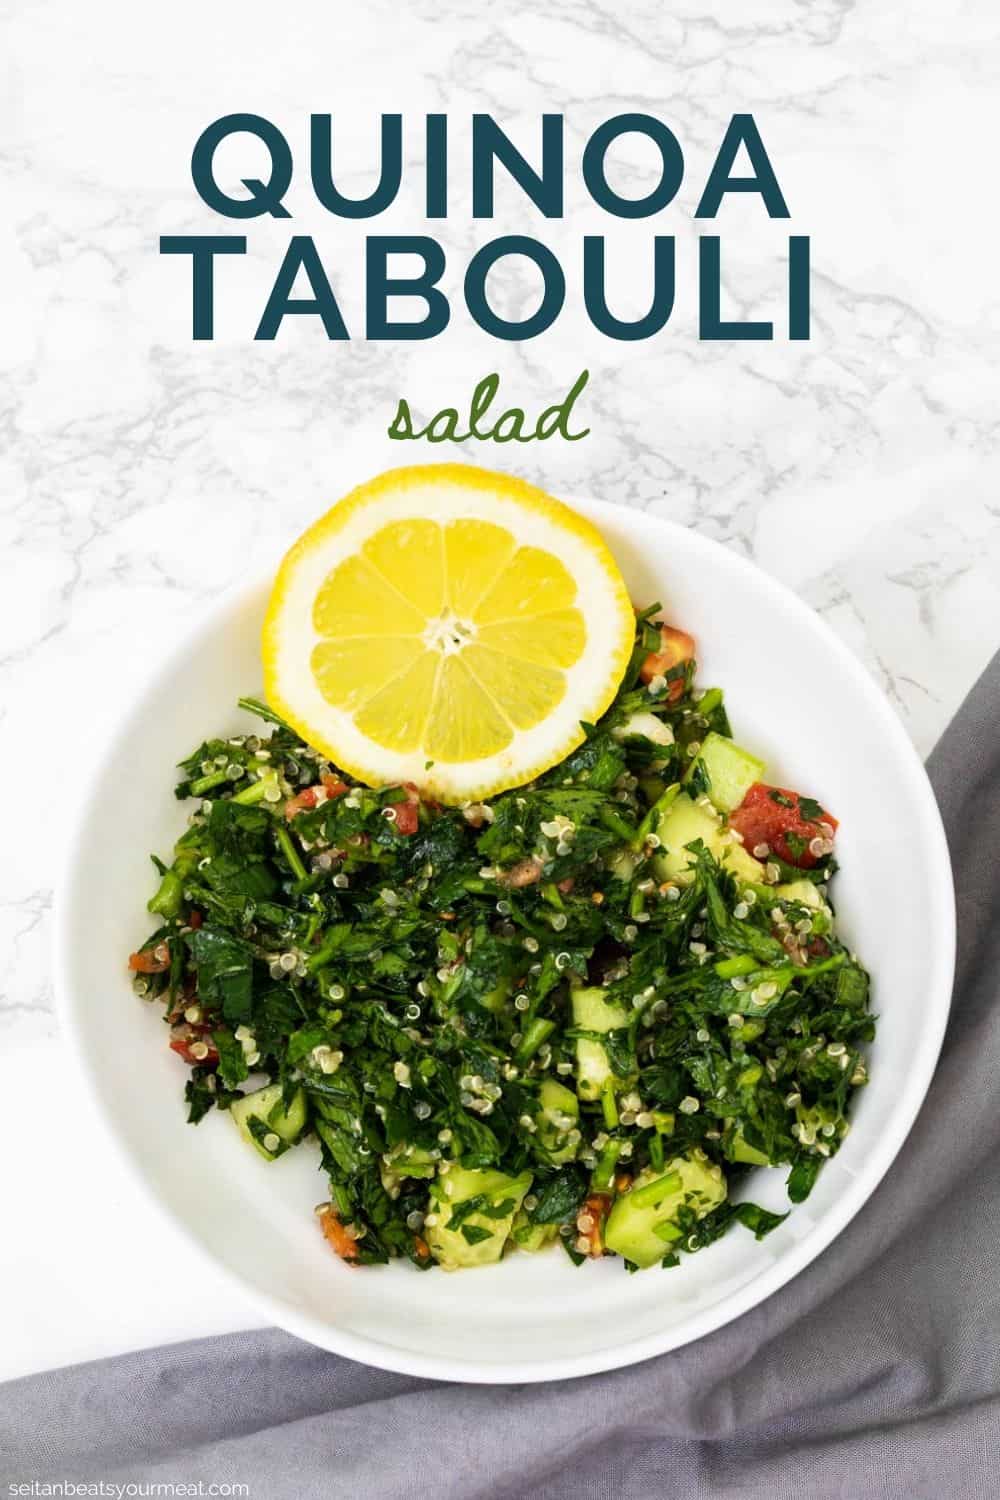 Bowl of quinoa tabbouleh with lemon slice and gray cloth napkin on white marble counter with text "Quinoa Tabouli Salad"